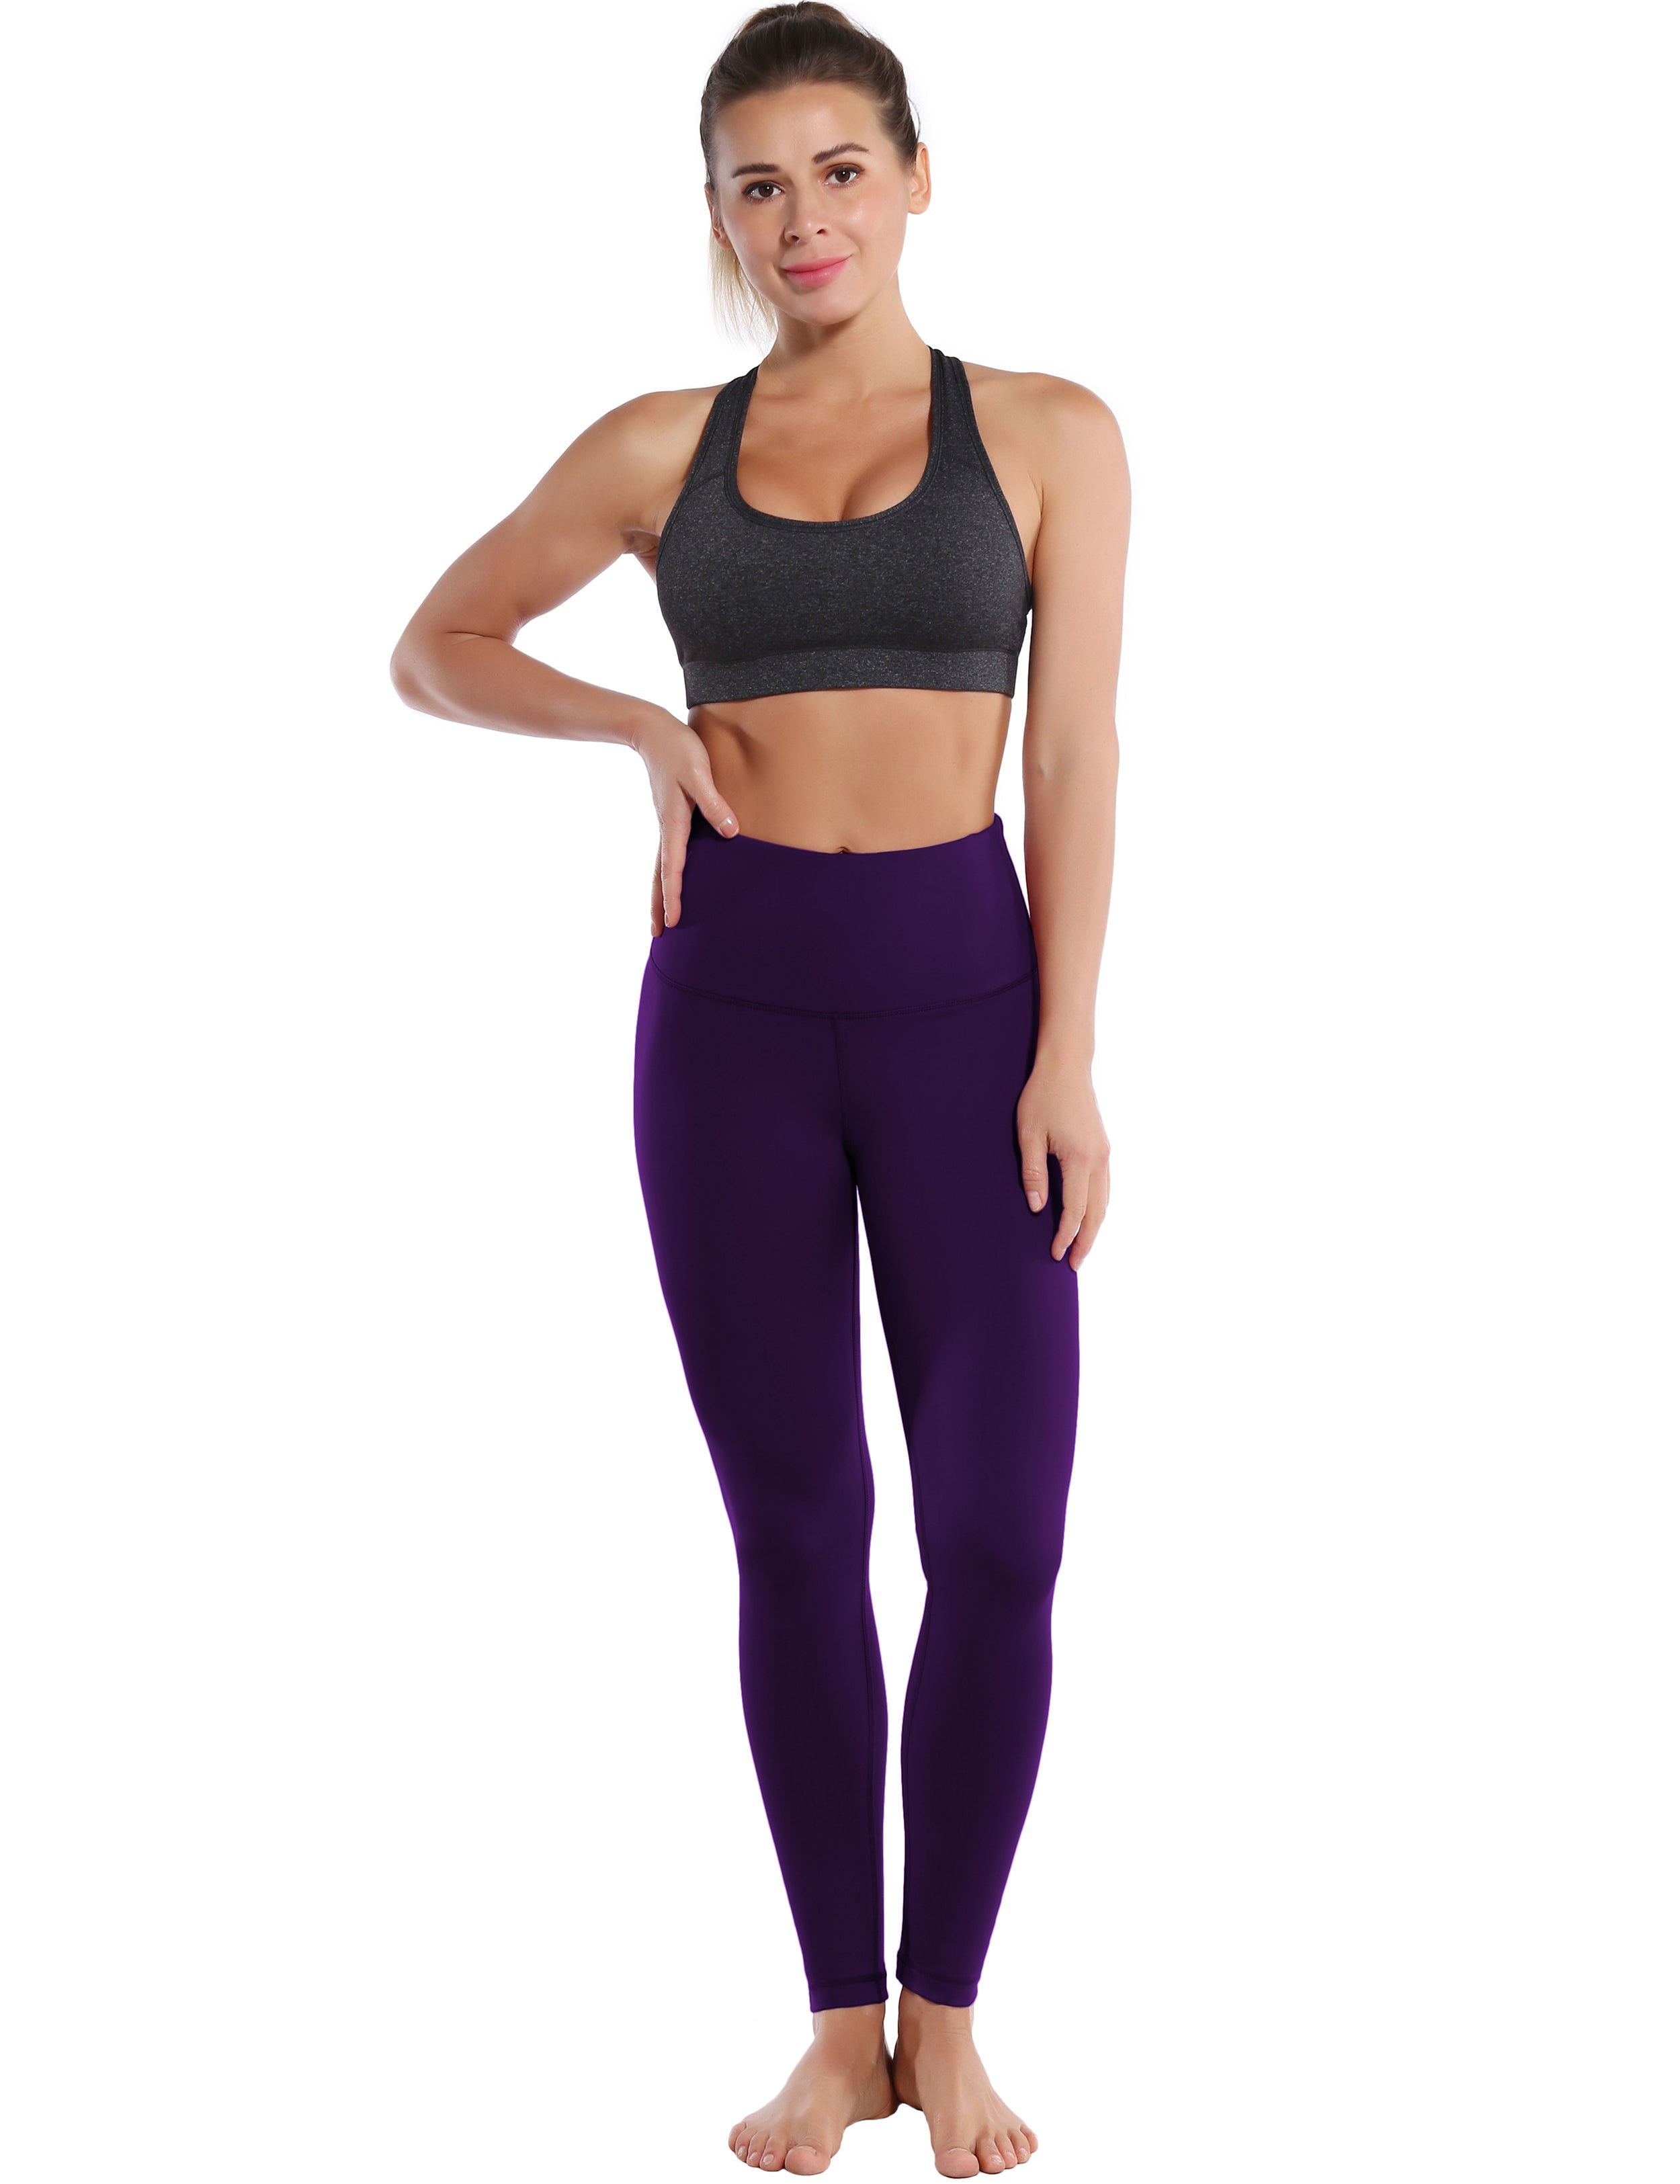 High Waist Golf Pants eggplantpurple 75%Nylon/25%Spandex Fabric doesn't attract lint easily 4-way stretch No see-through Moisture-wicking Tummy control Inner pocket Four lengths